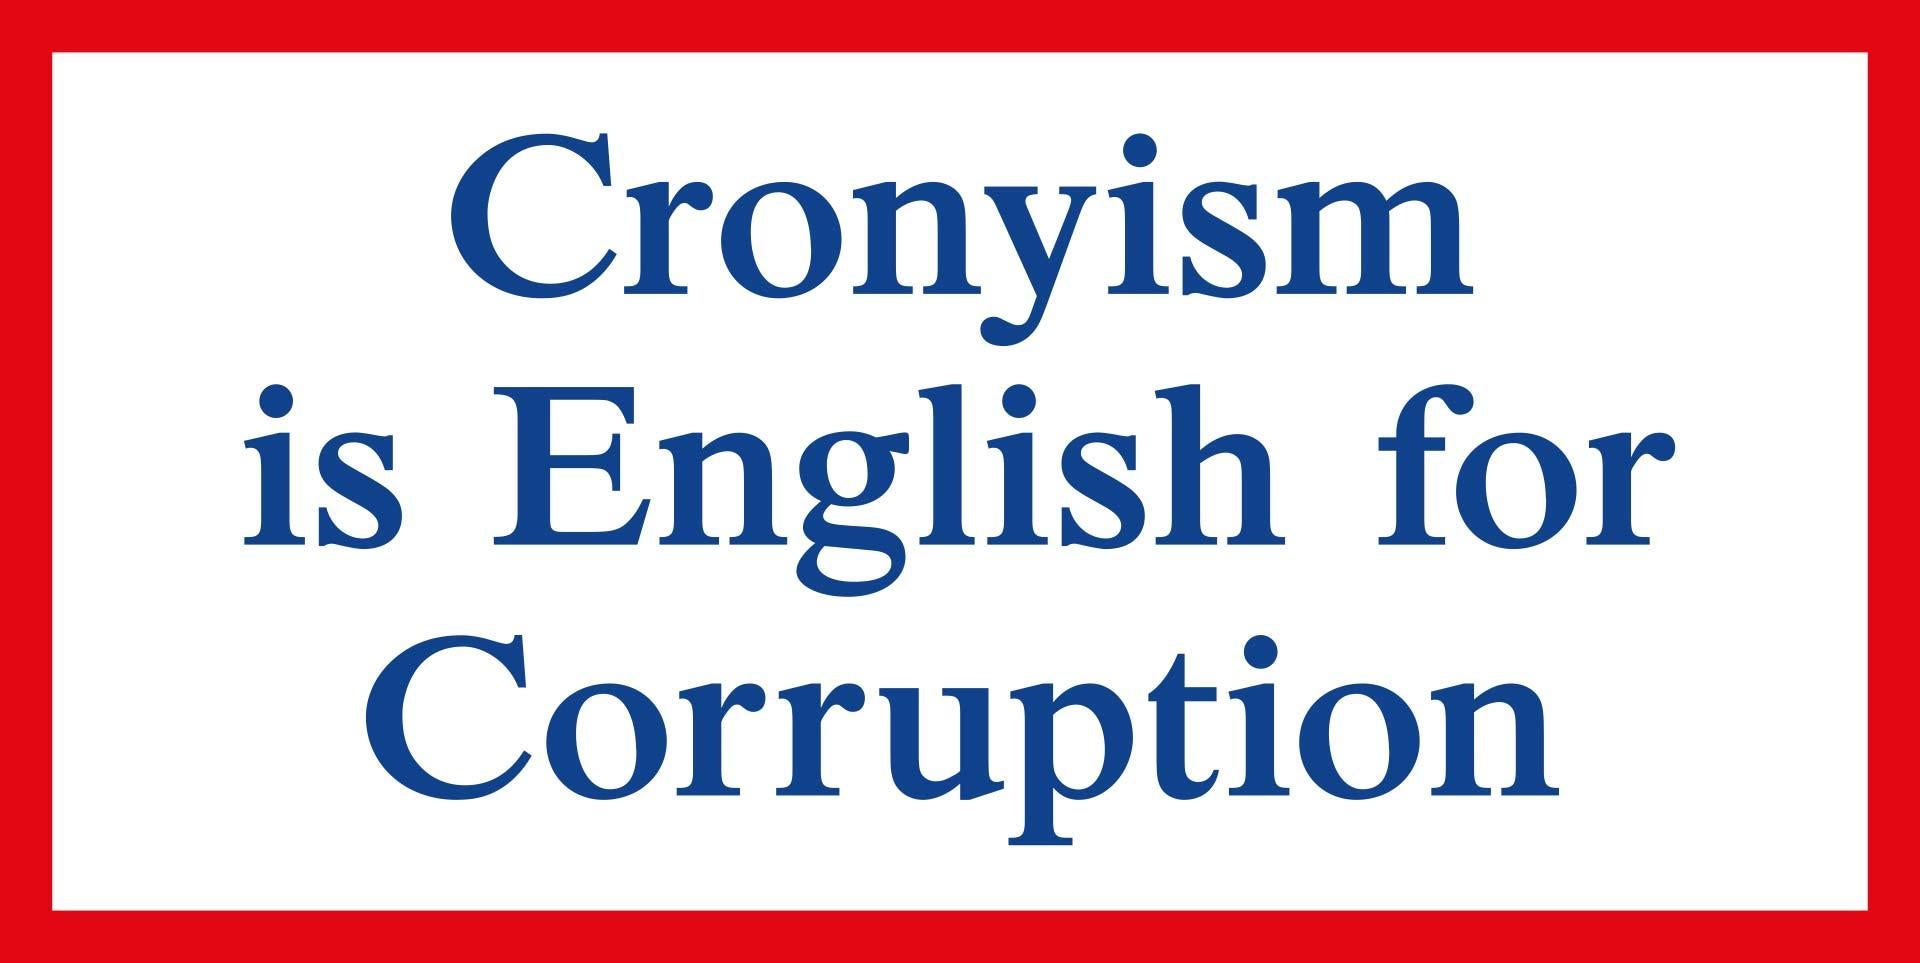 Cronyism is English for Corruption - Art by Jeremy Deller